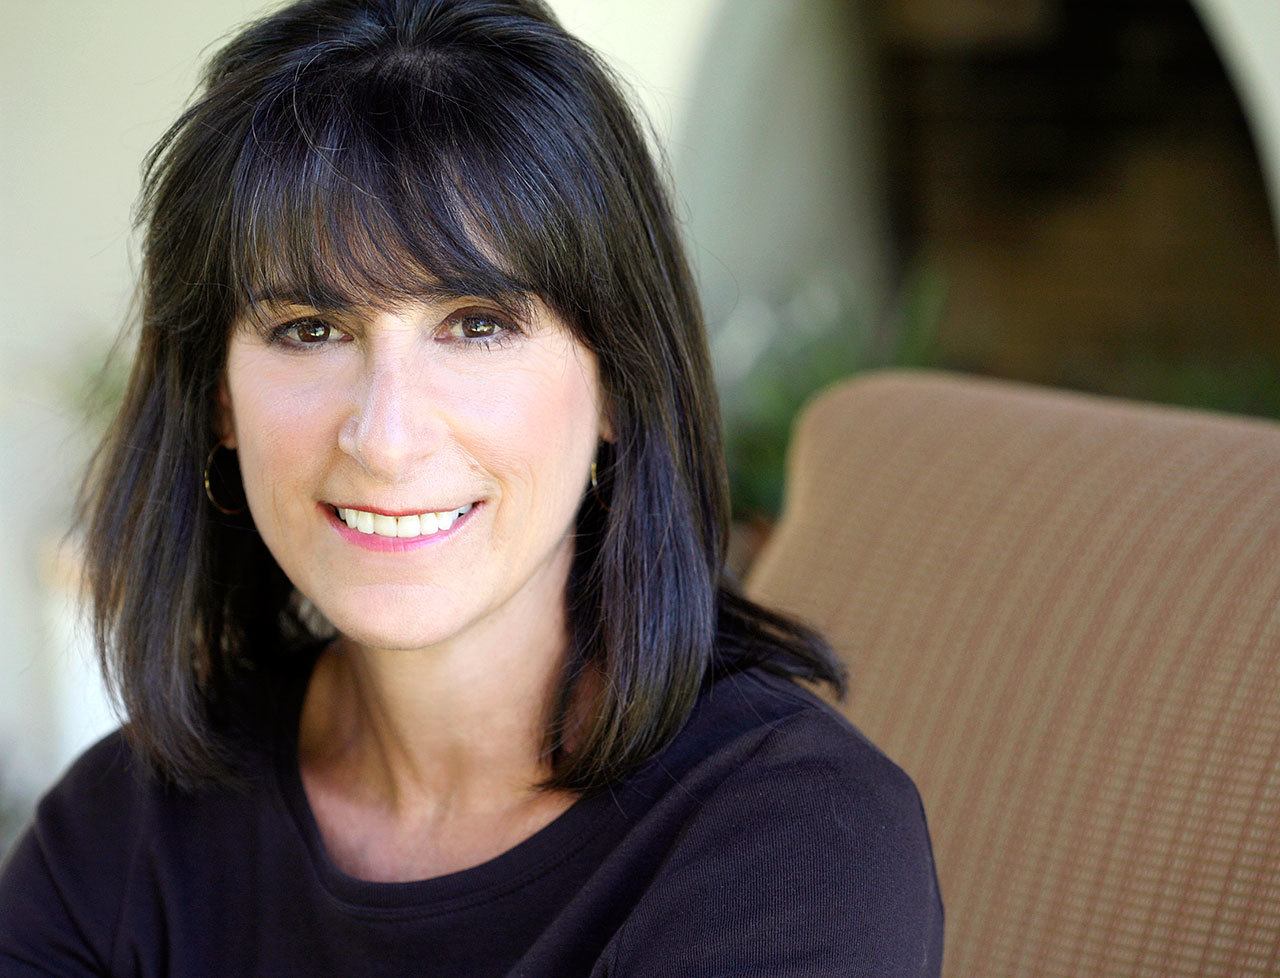 Singer-songwriter Karla Bonoff will perform at Fort Worden Commons on Saturday night. (Erin Fiedler)